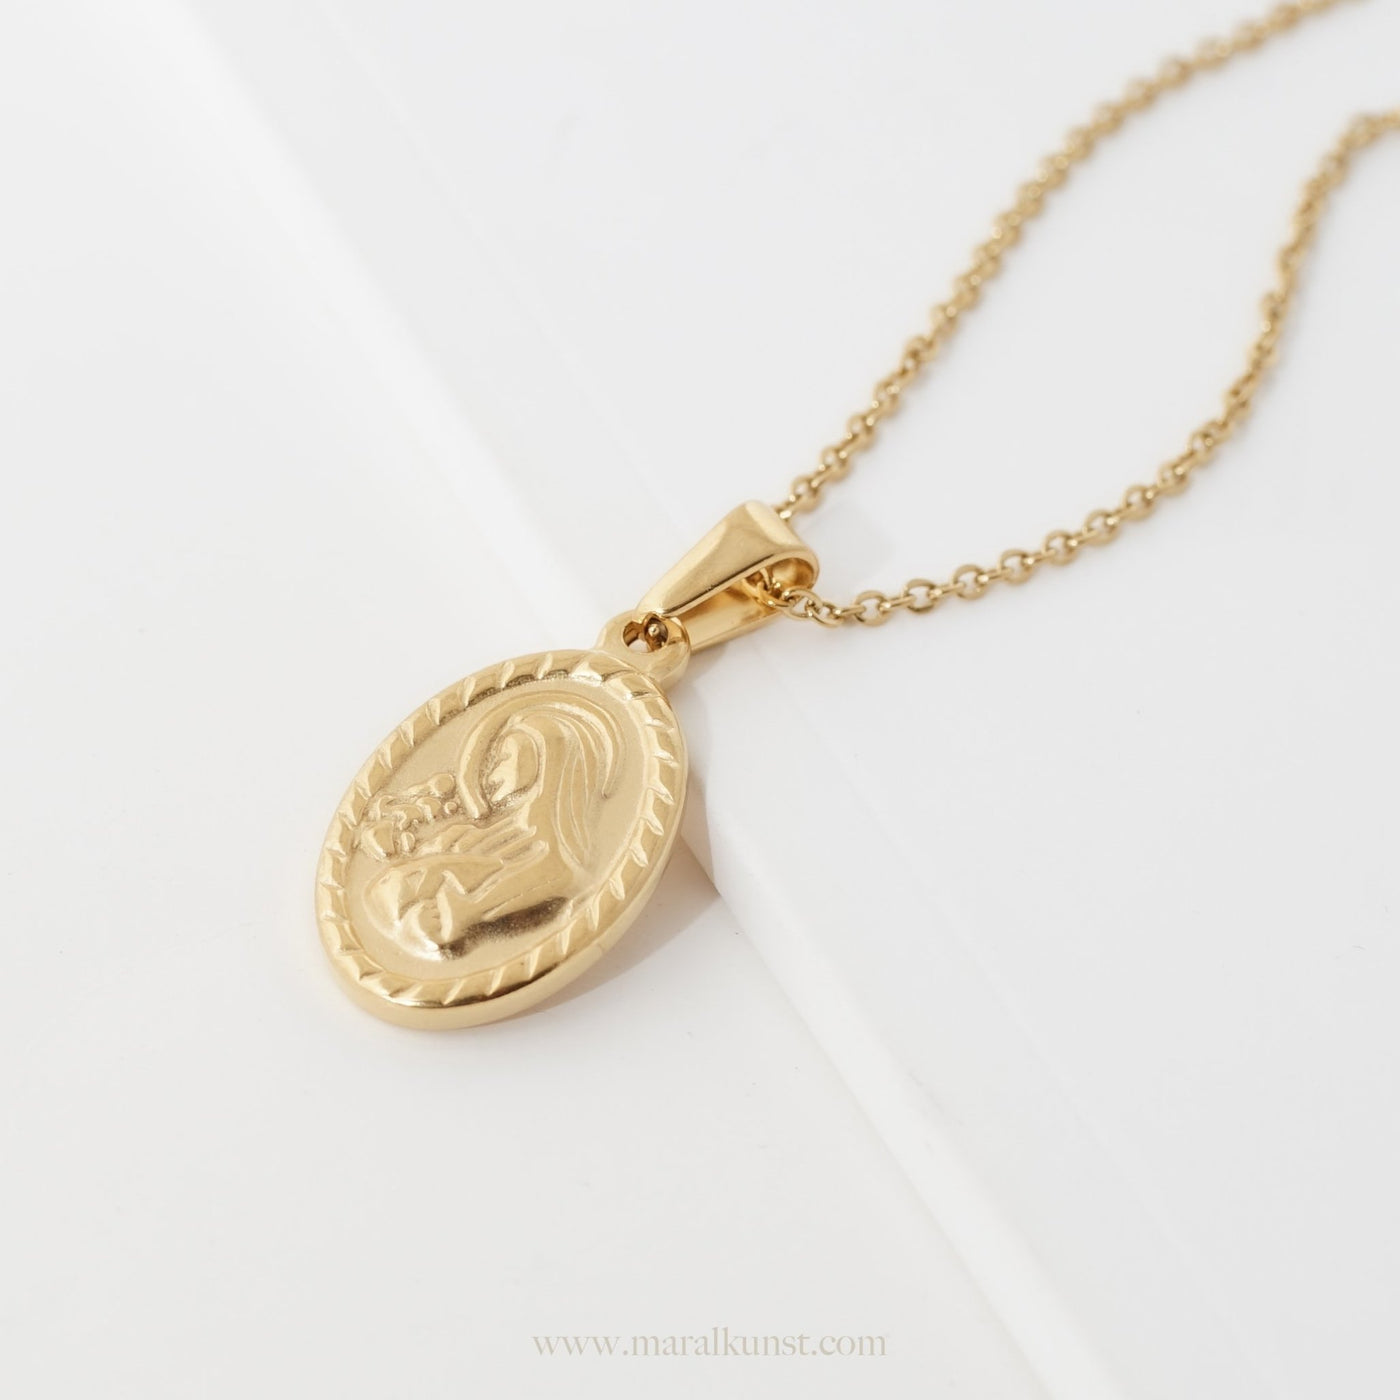 Holy Mary Necklace - Maral Kunst Jewelry